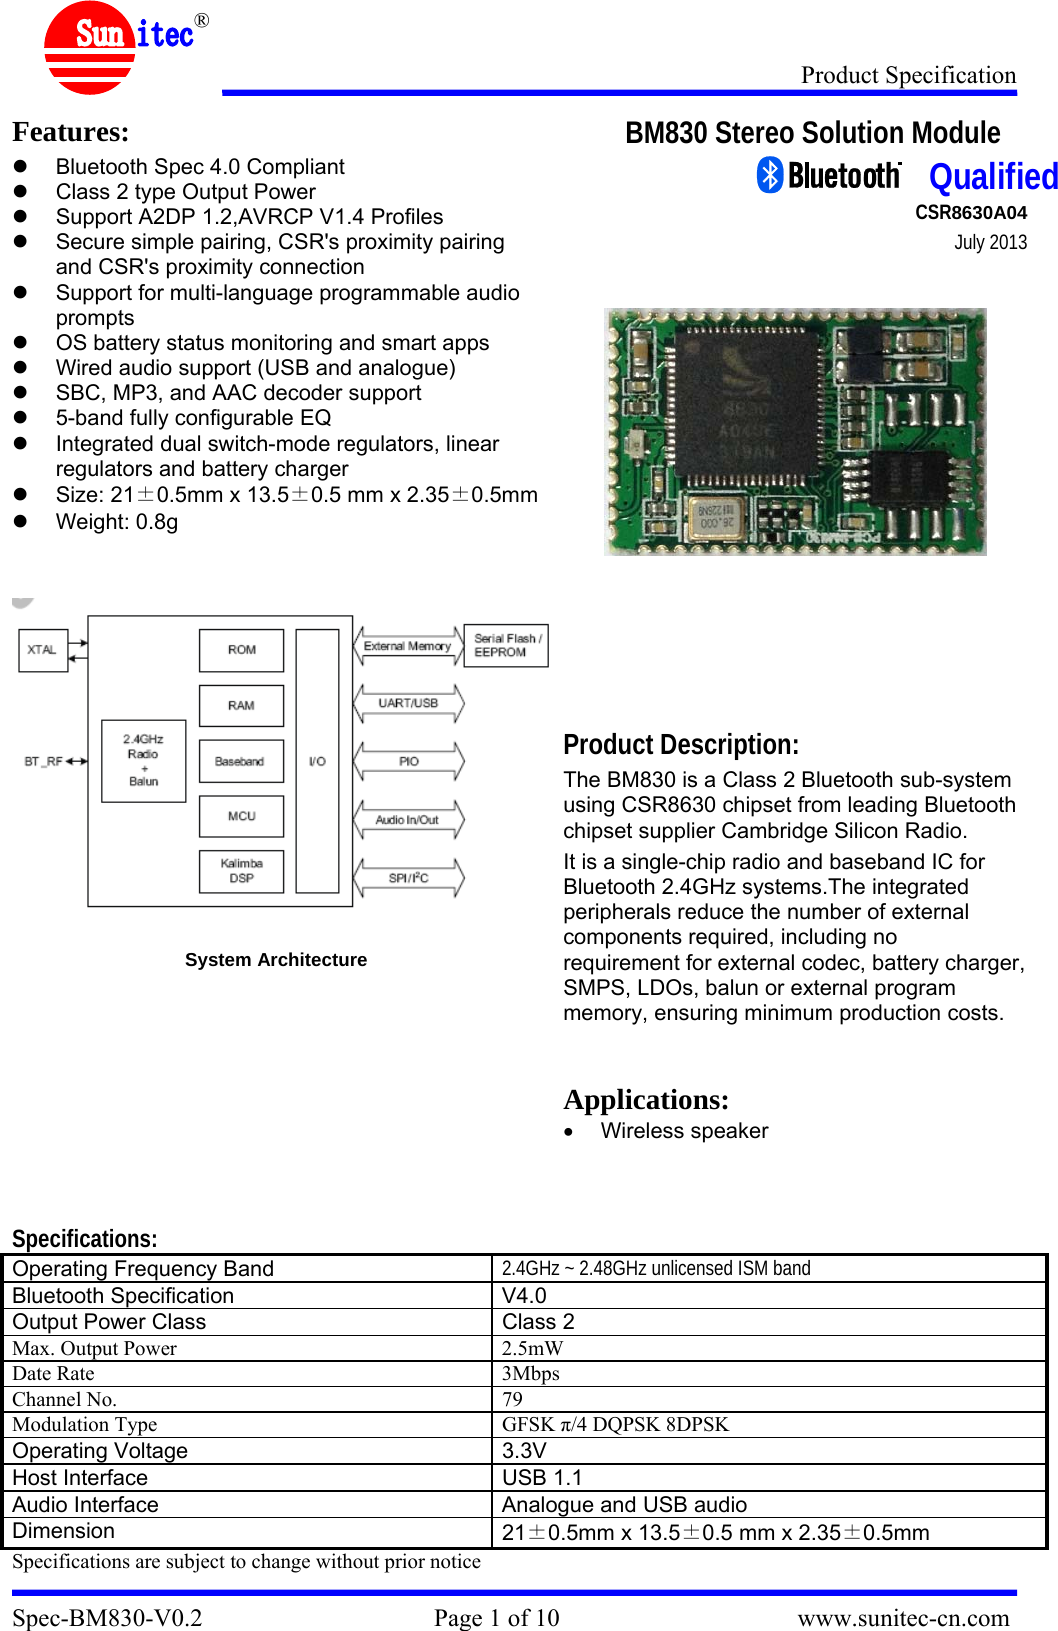 Product Specification Spec-BM830-V0.2                                     Page 1 of 10                                      www.sunitec-cn.com  ® Features: z  Bluetooth Spec 4.0 Compliant z  Class 2 type Output Power z  Support A2DP 1.2,AVRCP V1.4 Profiles z  Secure simple pairing, CSR&apos;s proximity pairing and CSR&apos;s proximity connection z  Support for multi-language programmable audio prompts z  OS battery status monitoring and smart apps z  Wired audio support (USB and analogue) z  SBC, MP3, and AAC decoder support z  5-band fully configurable EQ z  Integrated dual switch-mode regulators, linear regulators and battery charger z Size: 21±0.5mm x 13.5±0.5 mm x 2.35±0.5mmz Weight: 0.8g     System Architecture  BM830 Stereo Solution Module                                                                                        CSR8630A04                           July 2013           Product Description: The BM830 is a Class 2 Bluetooth sub-system using CSR8630 chipset from leading Bluetooth chipset supplier Cambridge Silicon Radio.  It is a single-chip radio and baseband IC for Bluetooth 2.4GHz systems.The integrated peripherals reduce the number of external components required, including no requirement for external codec, battery charger,SMPS, LDOs, balun or external program memory, ensuring minimum production costs.   Applications: • Wireless speaker    Specifications: Operating Frequency Band  2.4GHz ~ 2.48GHz unlicensed ISM band Bluetooth Specification  V4.0 Output Power Class  Class 2 Max. Output Power  2.5mW Date Rate  3Mbps Channel No.  79 Modulation Type  GFSK π/4 DQPSK 8DPSK Operating Voltage  3.3V  Host Interface  USB 1.1 Audio Interface  Analogue and USB audio Dimension  21±0.5mm x 13.5±0.5 mm x 2.35±0.5mm Specifications are subject to change without prior notice  Qualified 